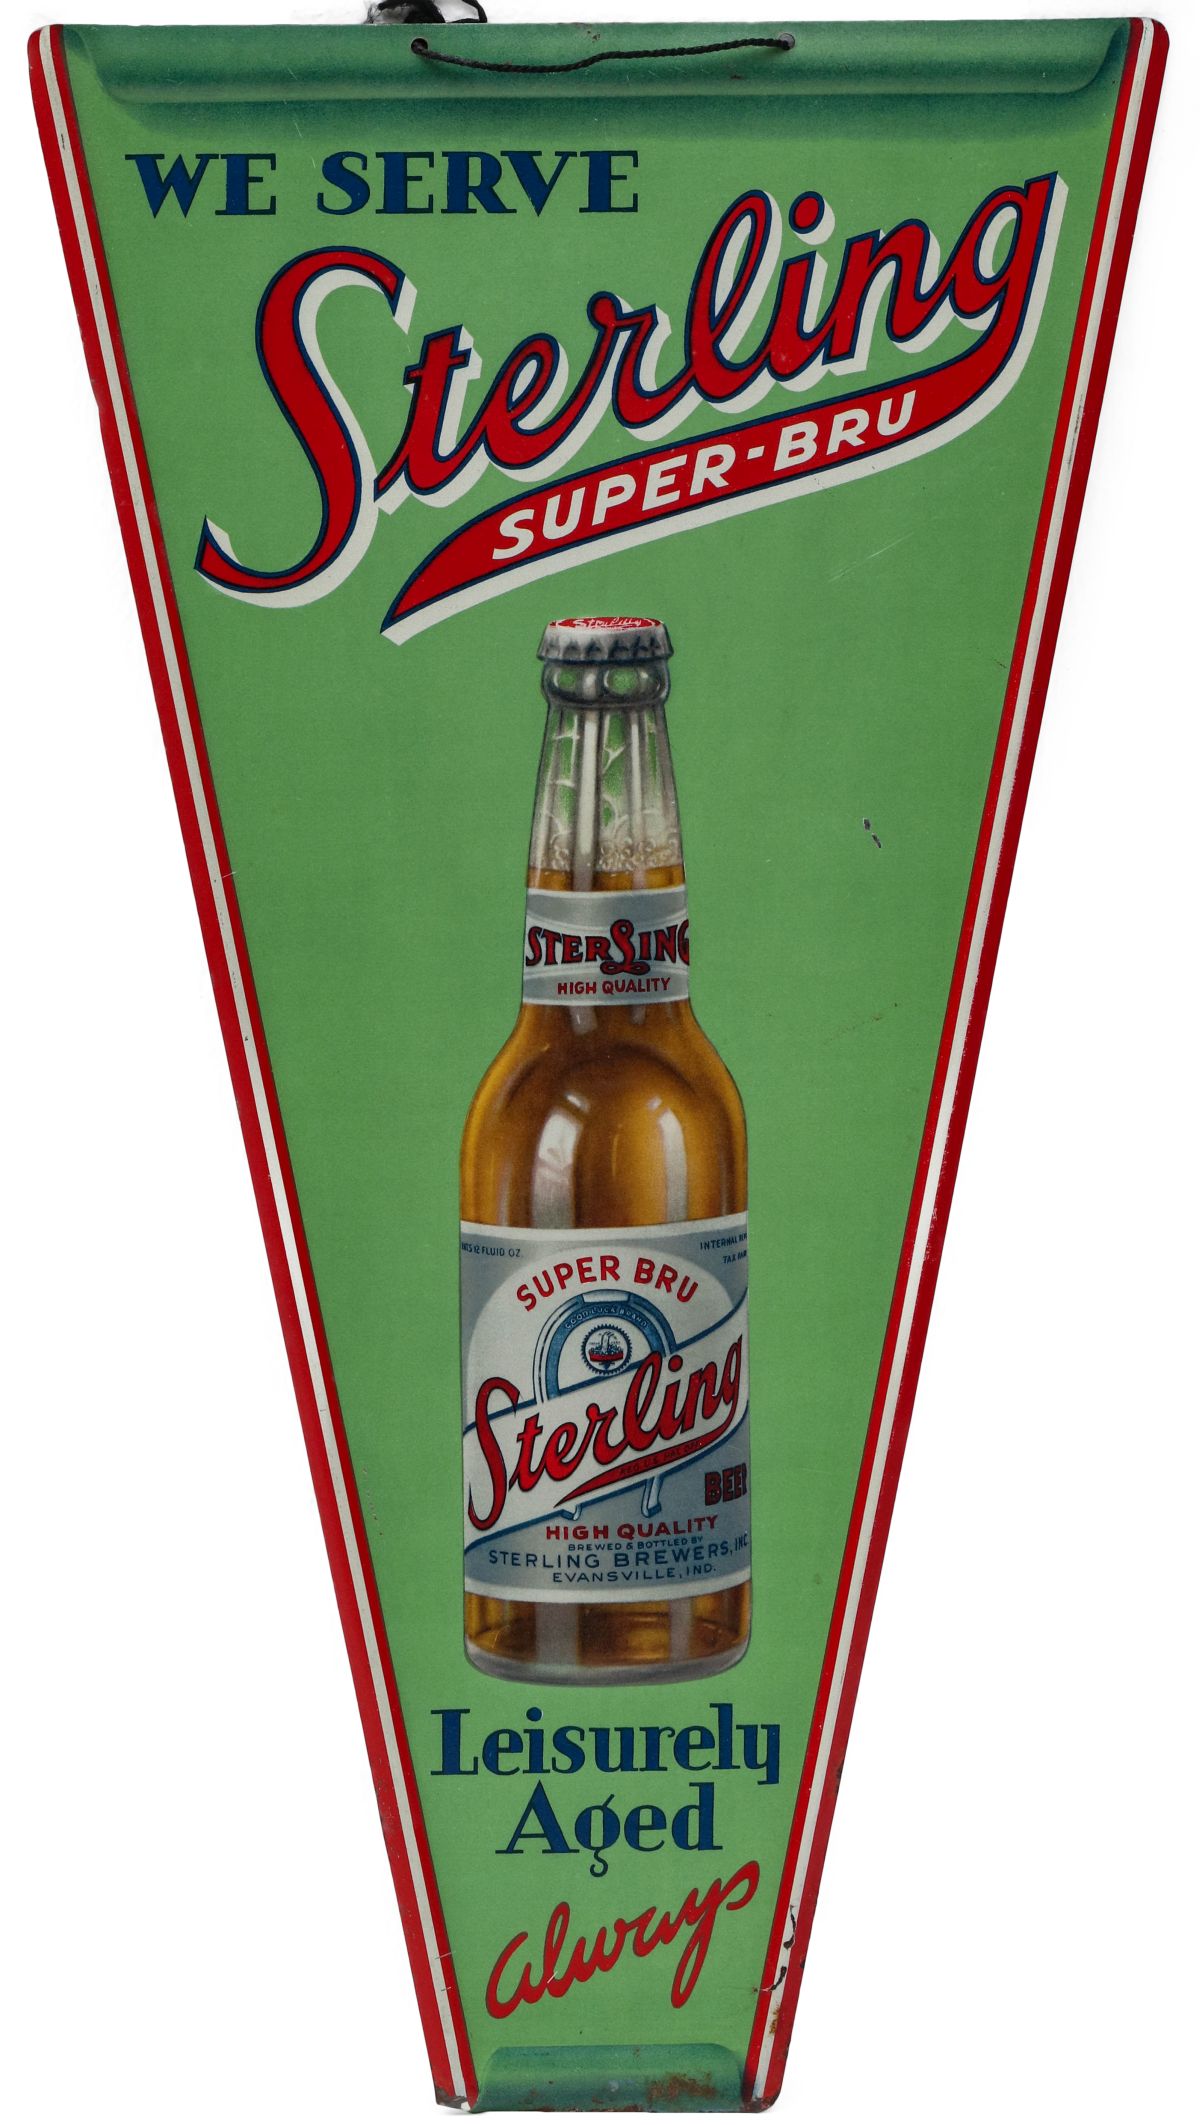 A LITHOGRAPHED TIN PENNANT SIGN FOR STERLING SUPER-BRU